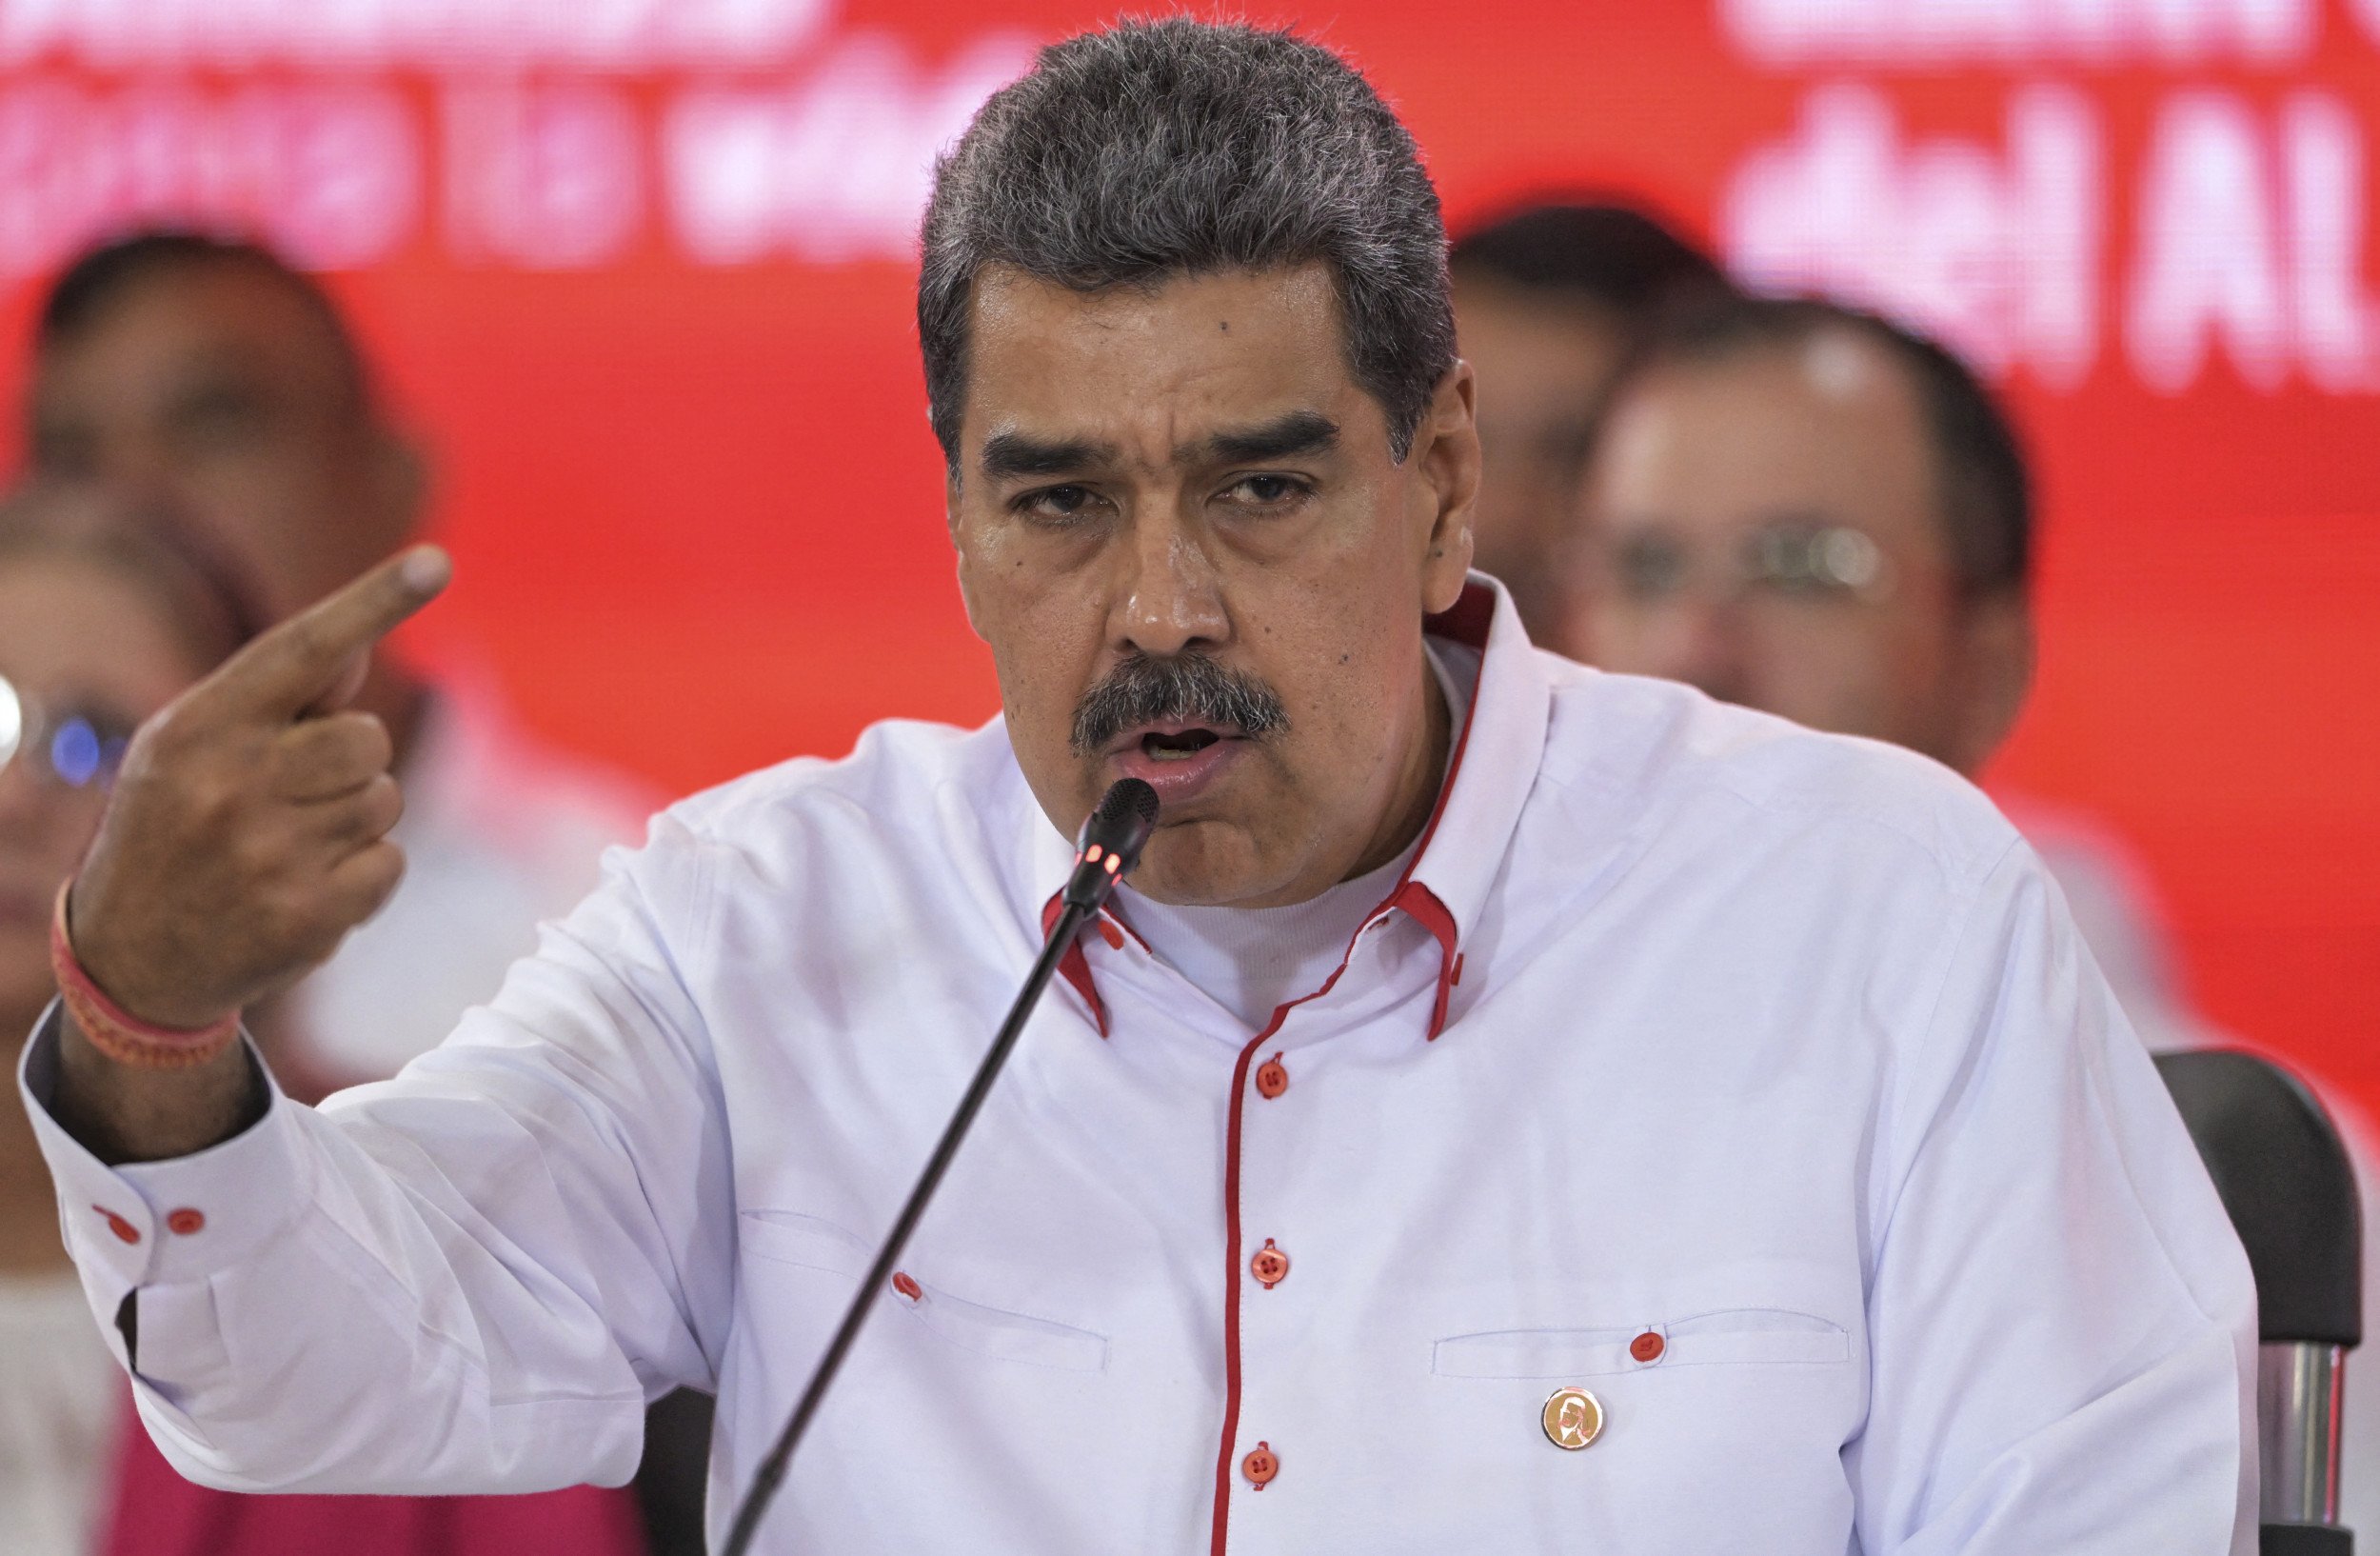 Venezuela Risks Going Back to Being the Pariah of South America | Opinion